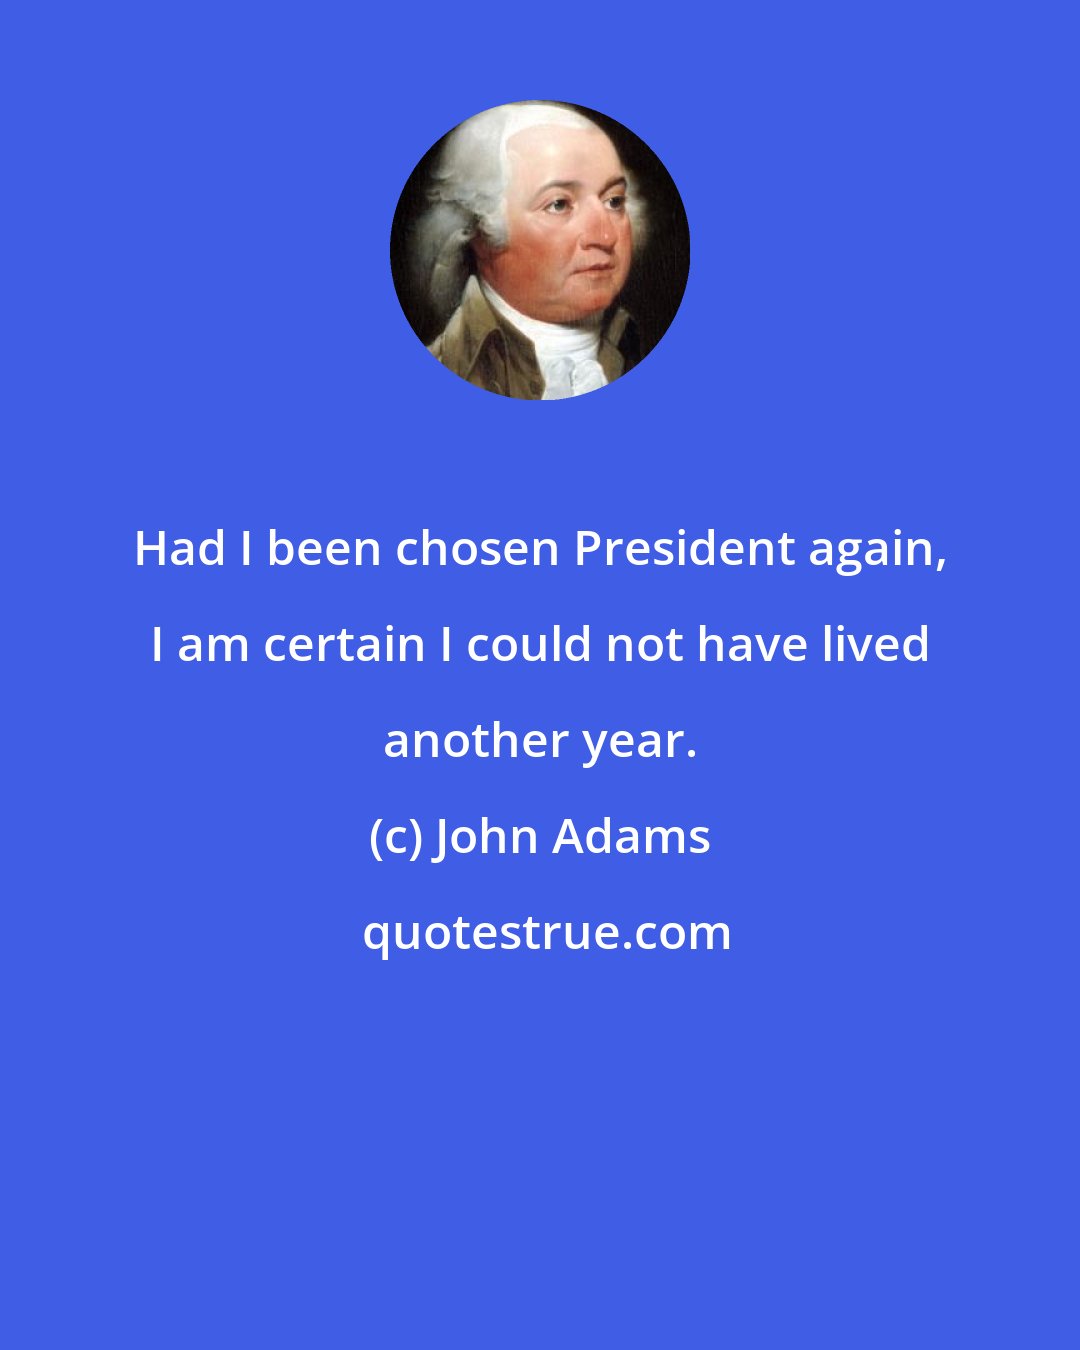 John Adams: Had I been chosen President again, I am certain I could not have lived another year.